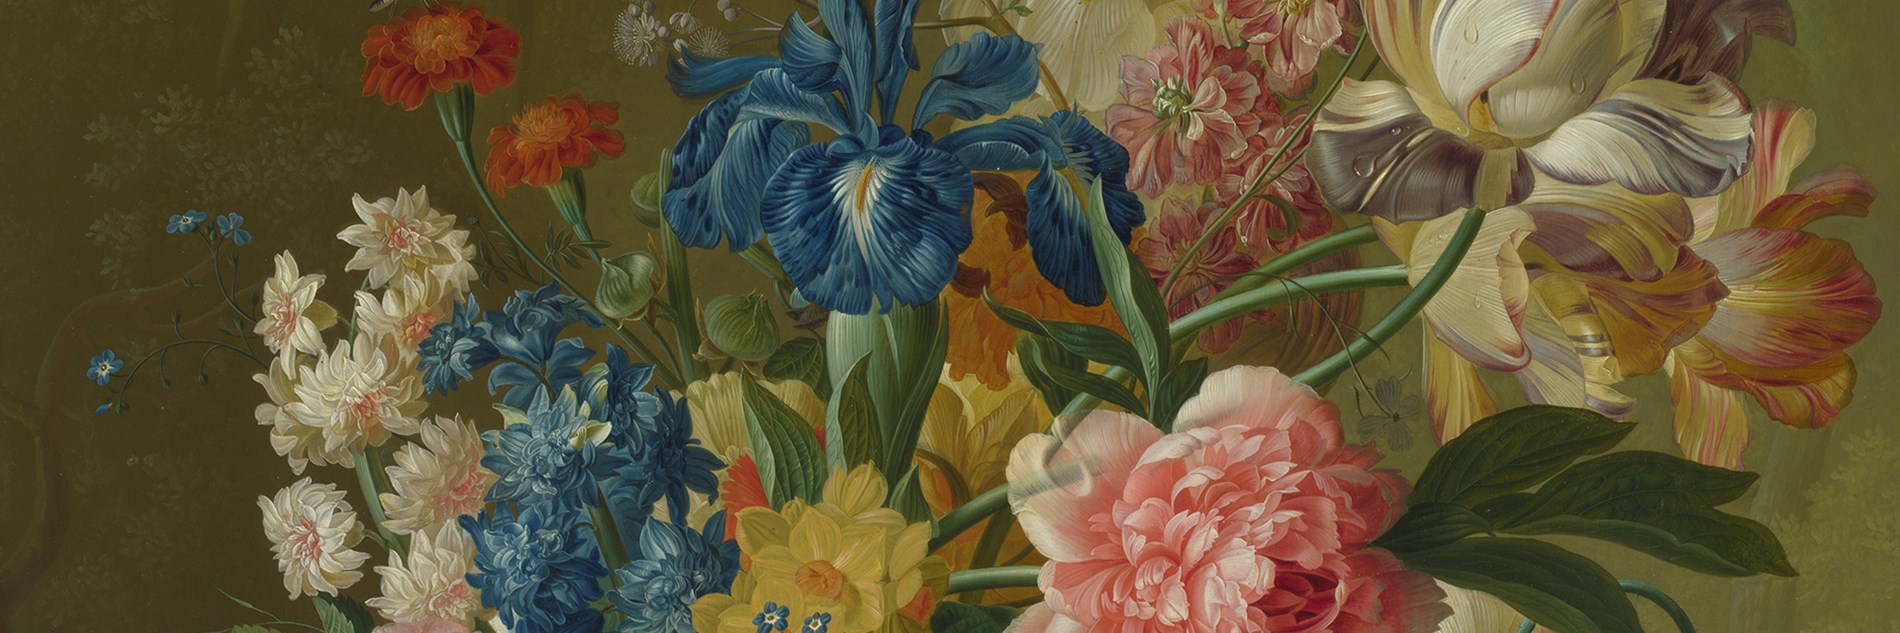 A teeming array of flowers including pink carnations and blue irises arranged in a vase against a muted green background